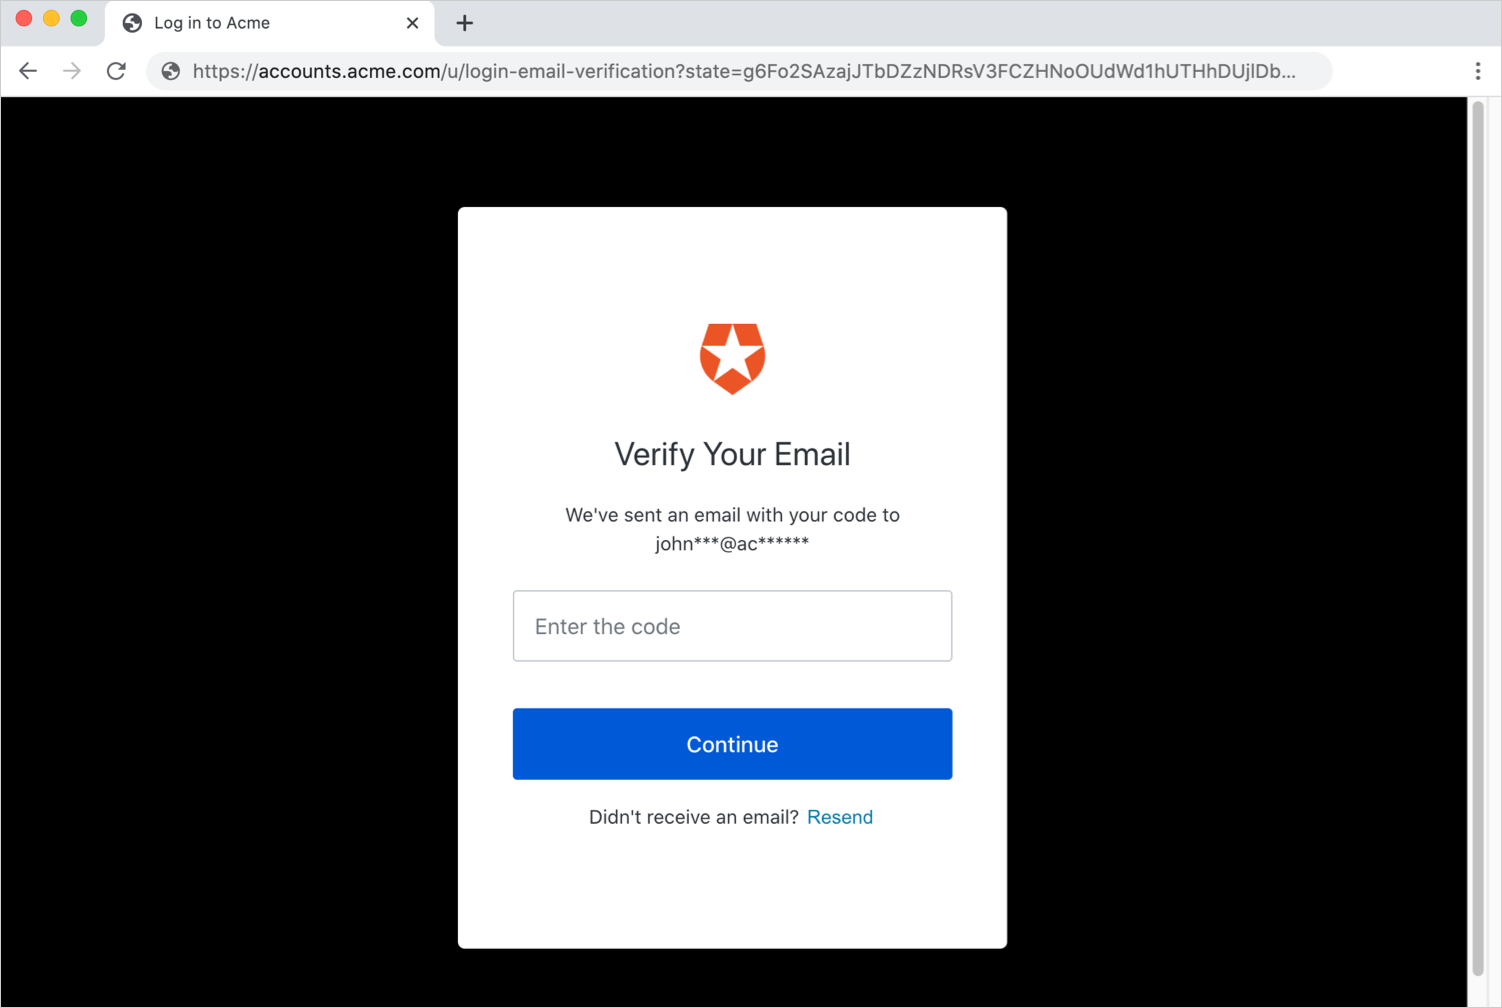 Auth0 - Email Verification Prompt - One-Time Code